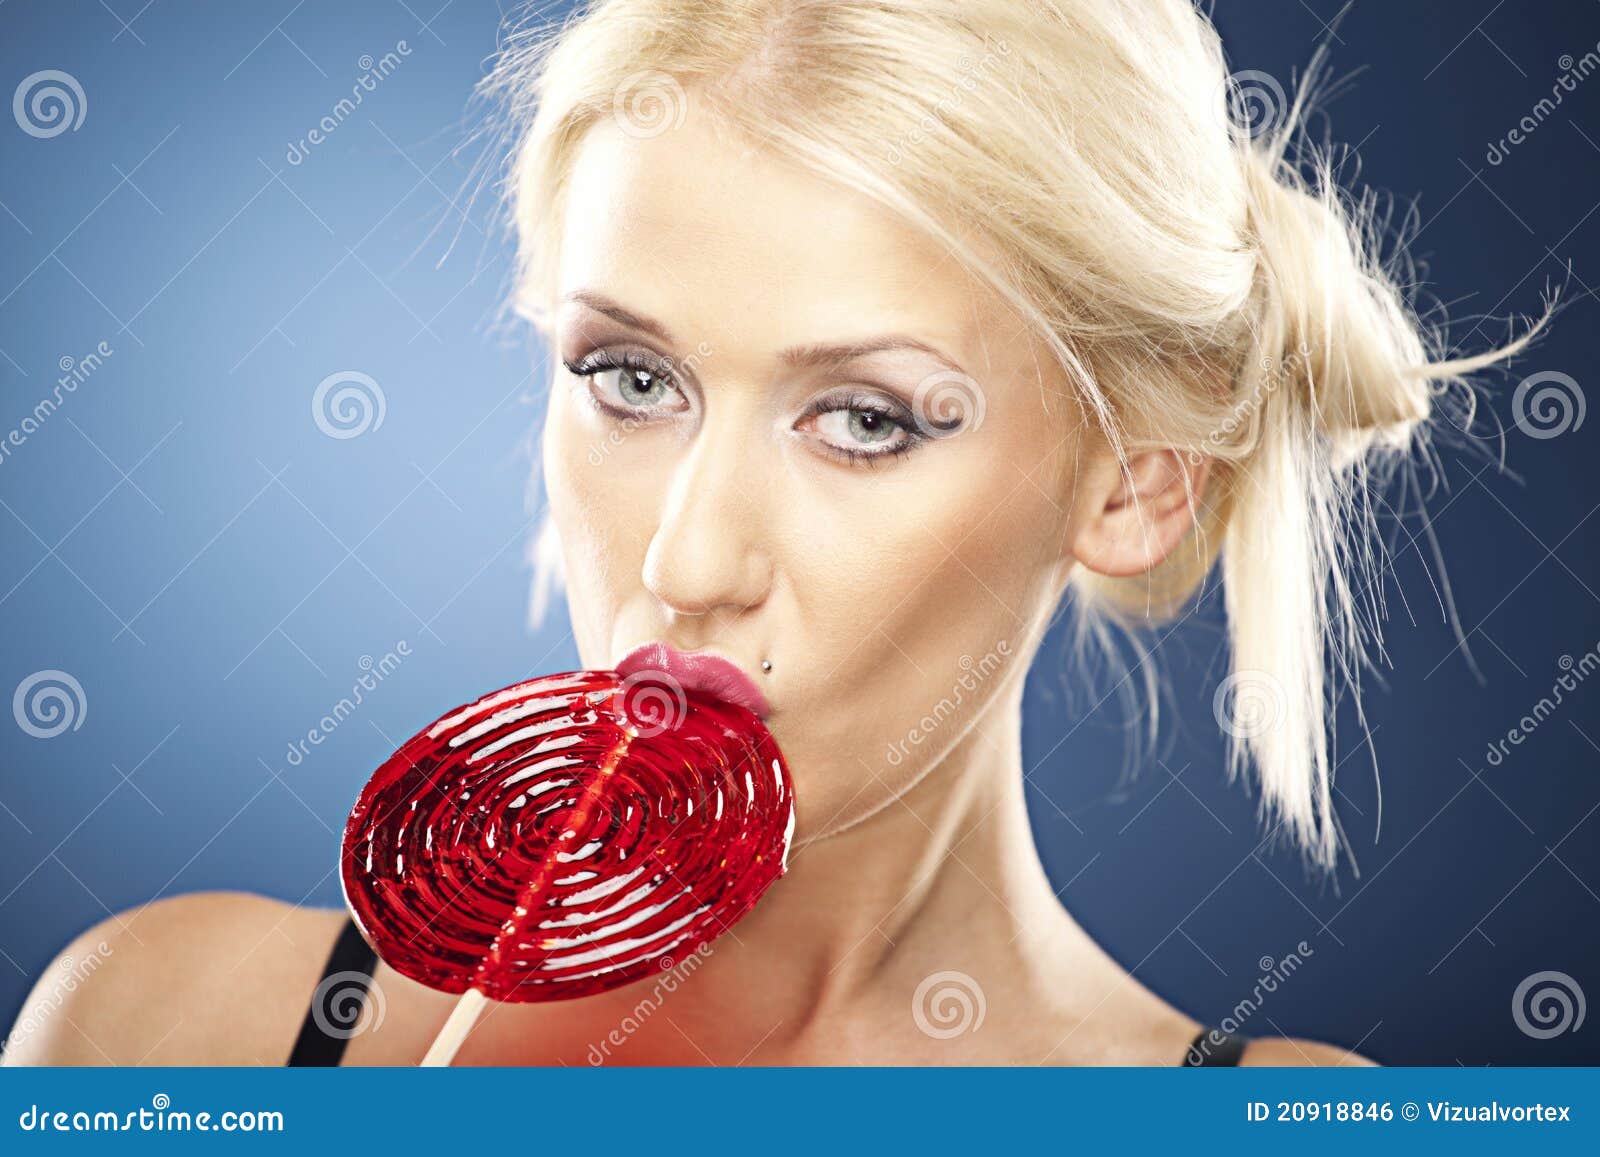 Blonde Girl With Lollipop Royalty Free Stock Image Image 20918846